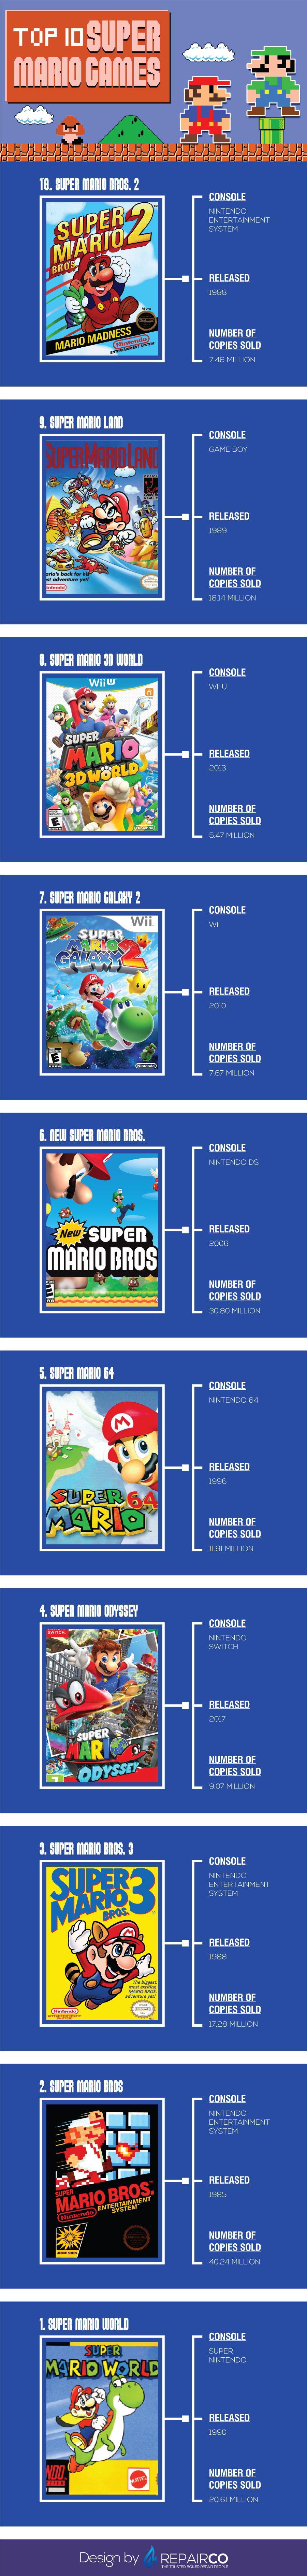 Ranking Every Game In The Super Mario Series - Game Informer